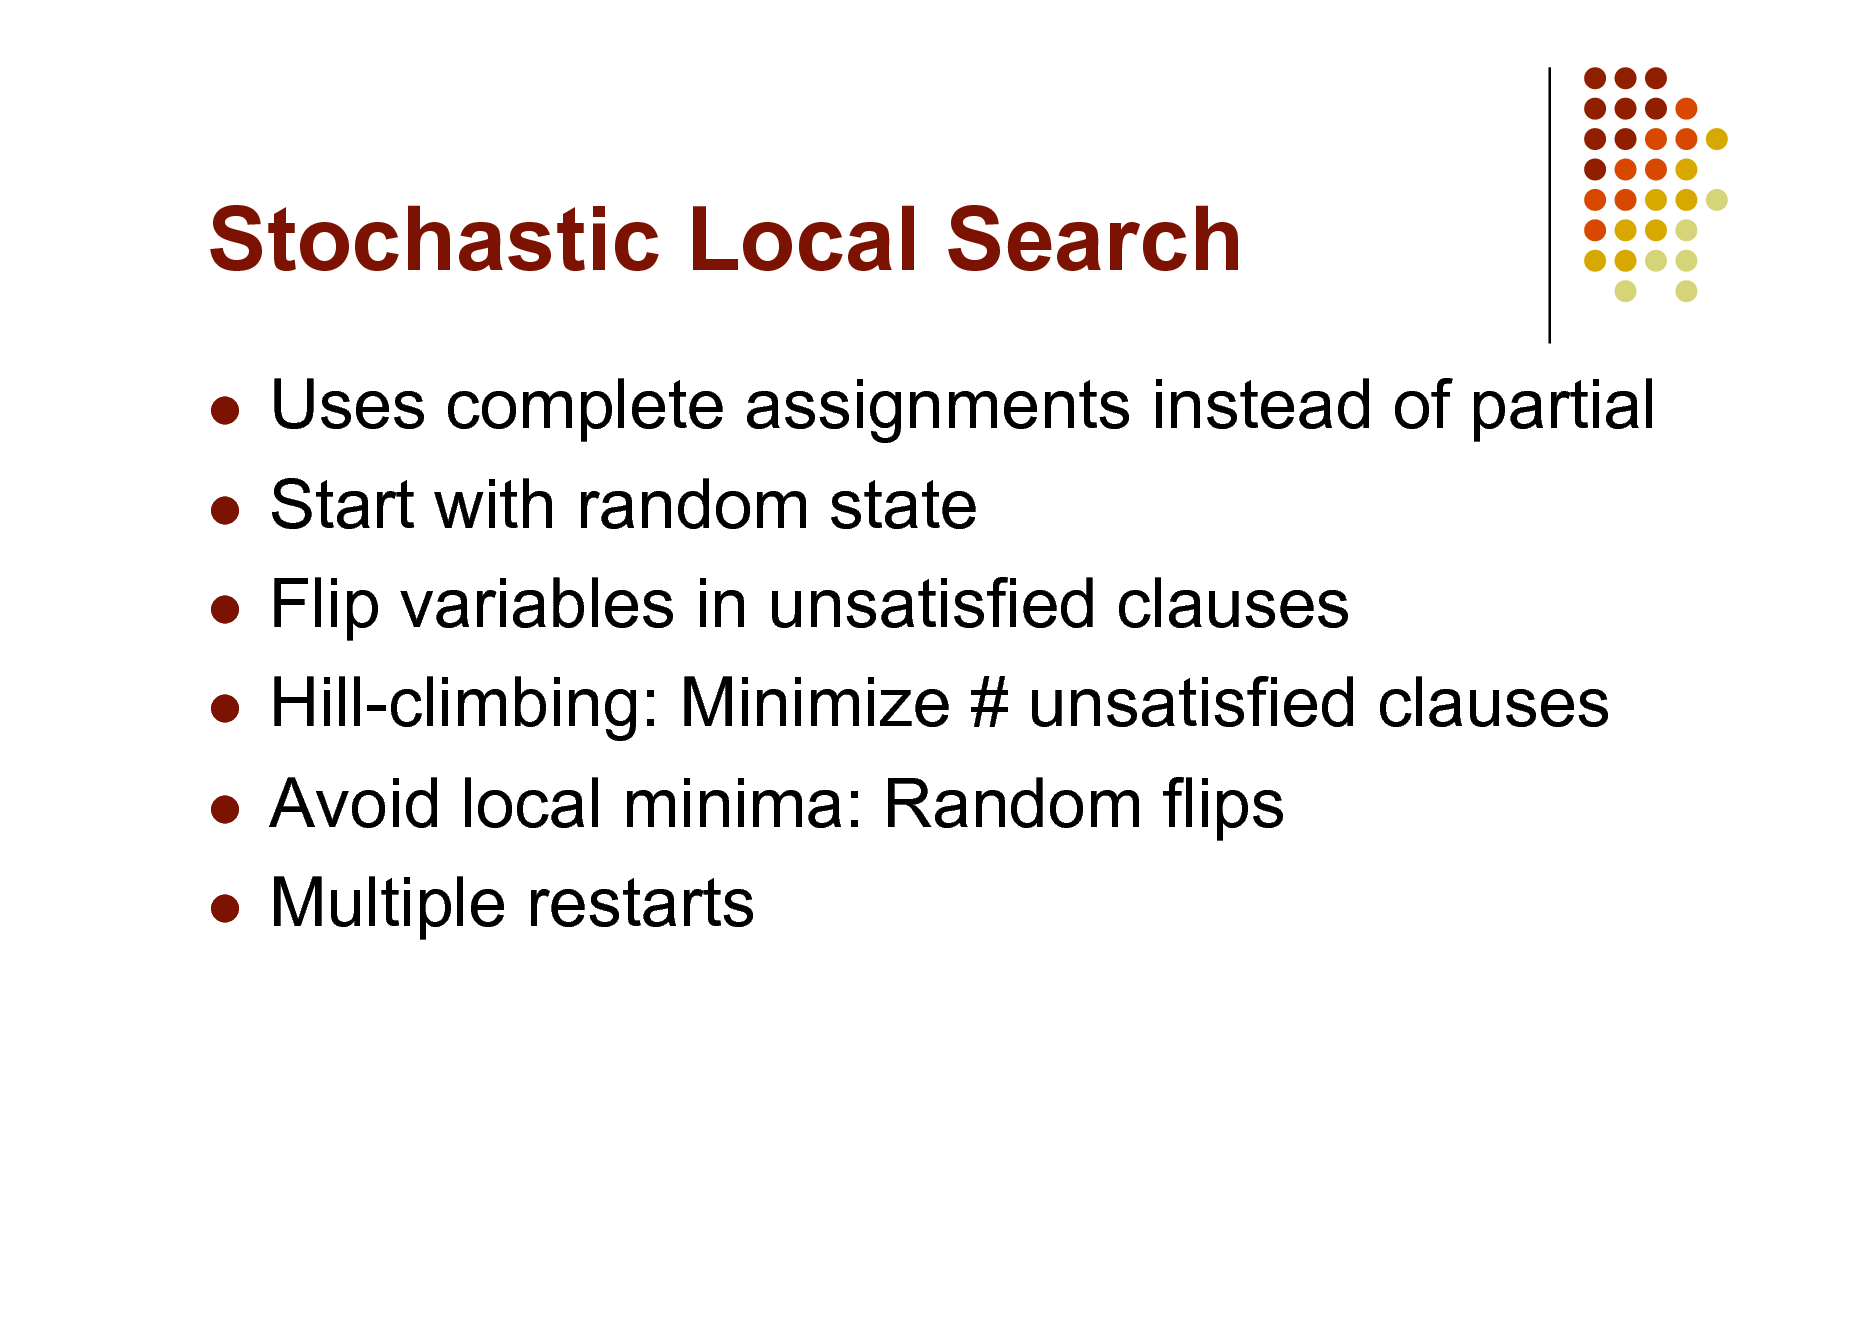 Slide: Stochastic Local Search
Uses complete assignments instead of partial  Start with random state  Flip variables in unsatisfied clauses  Hill-climbing: Minimize # unsatisfied clauses  Avoid local minima: Random flips  Multiple restarts


